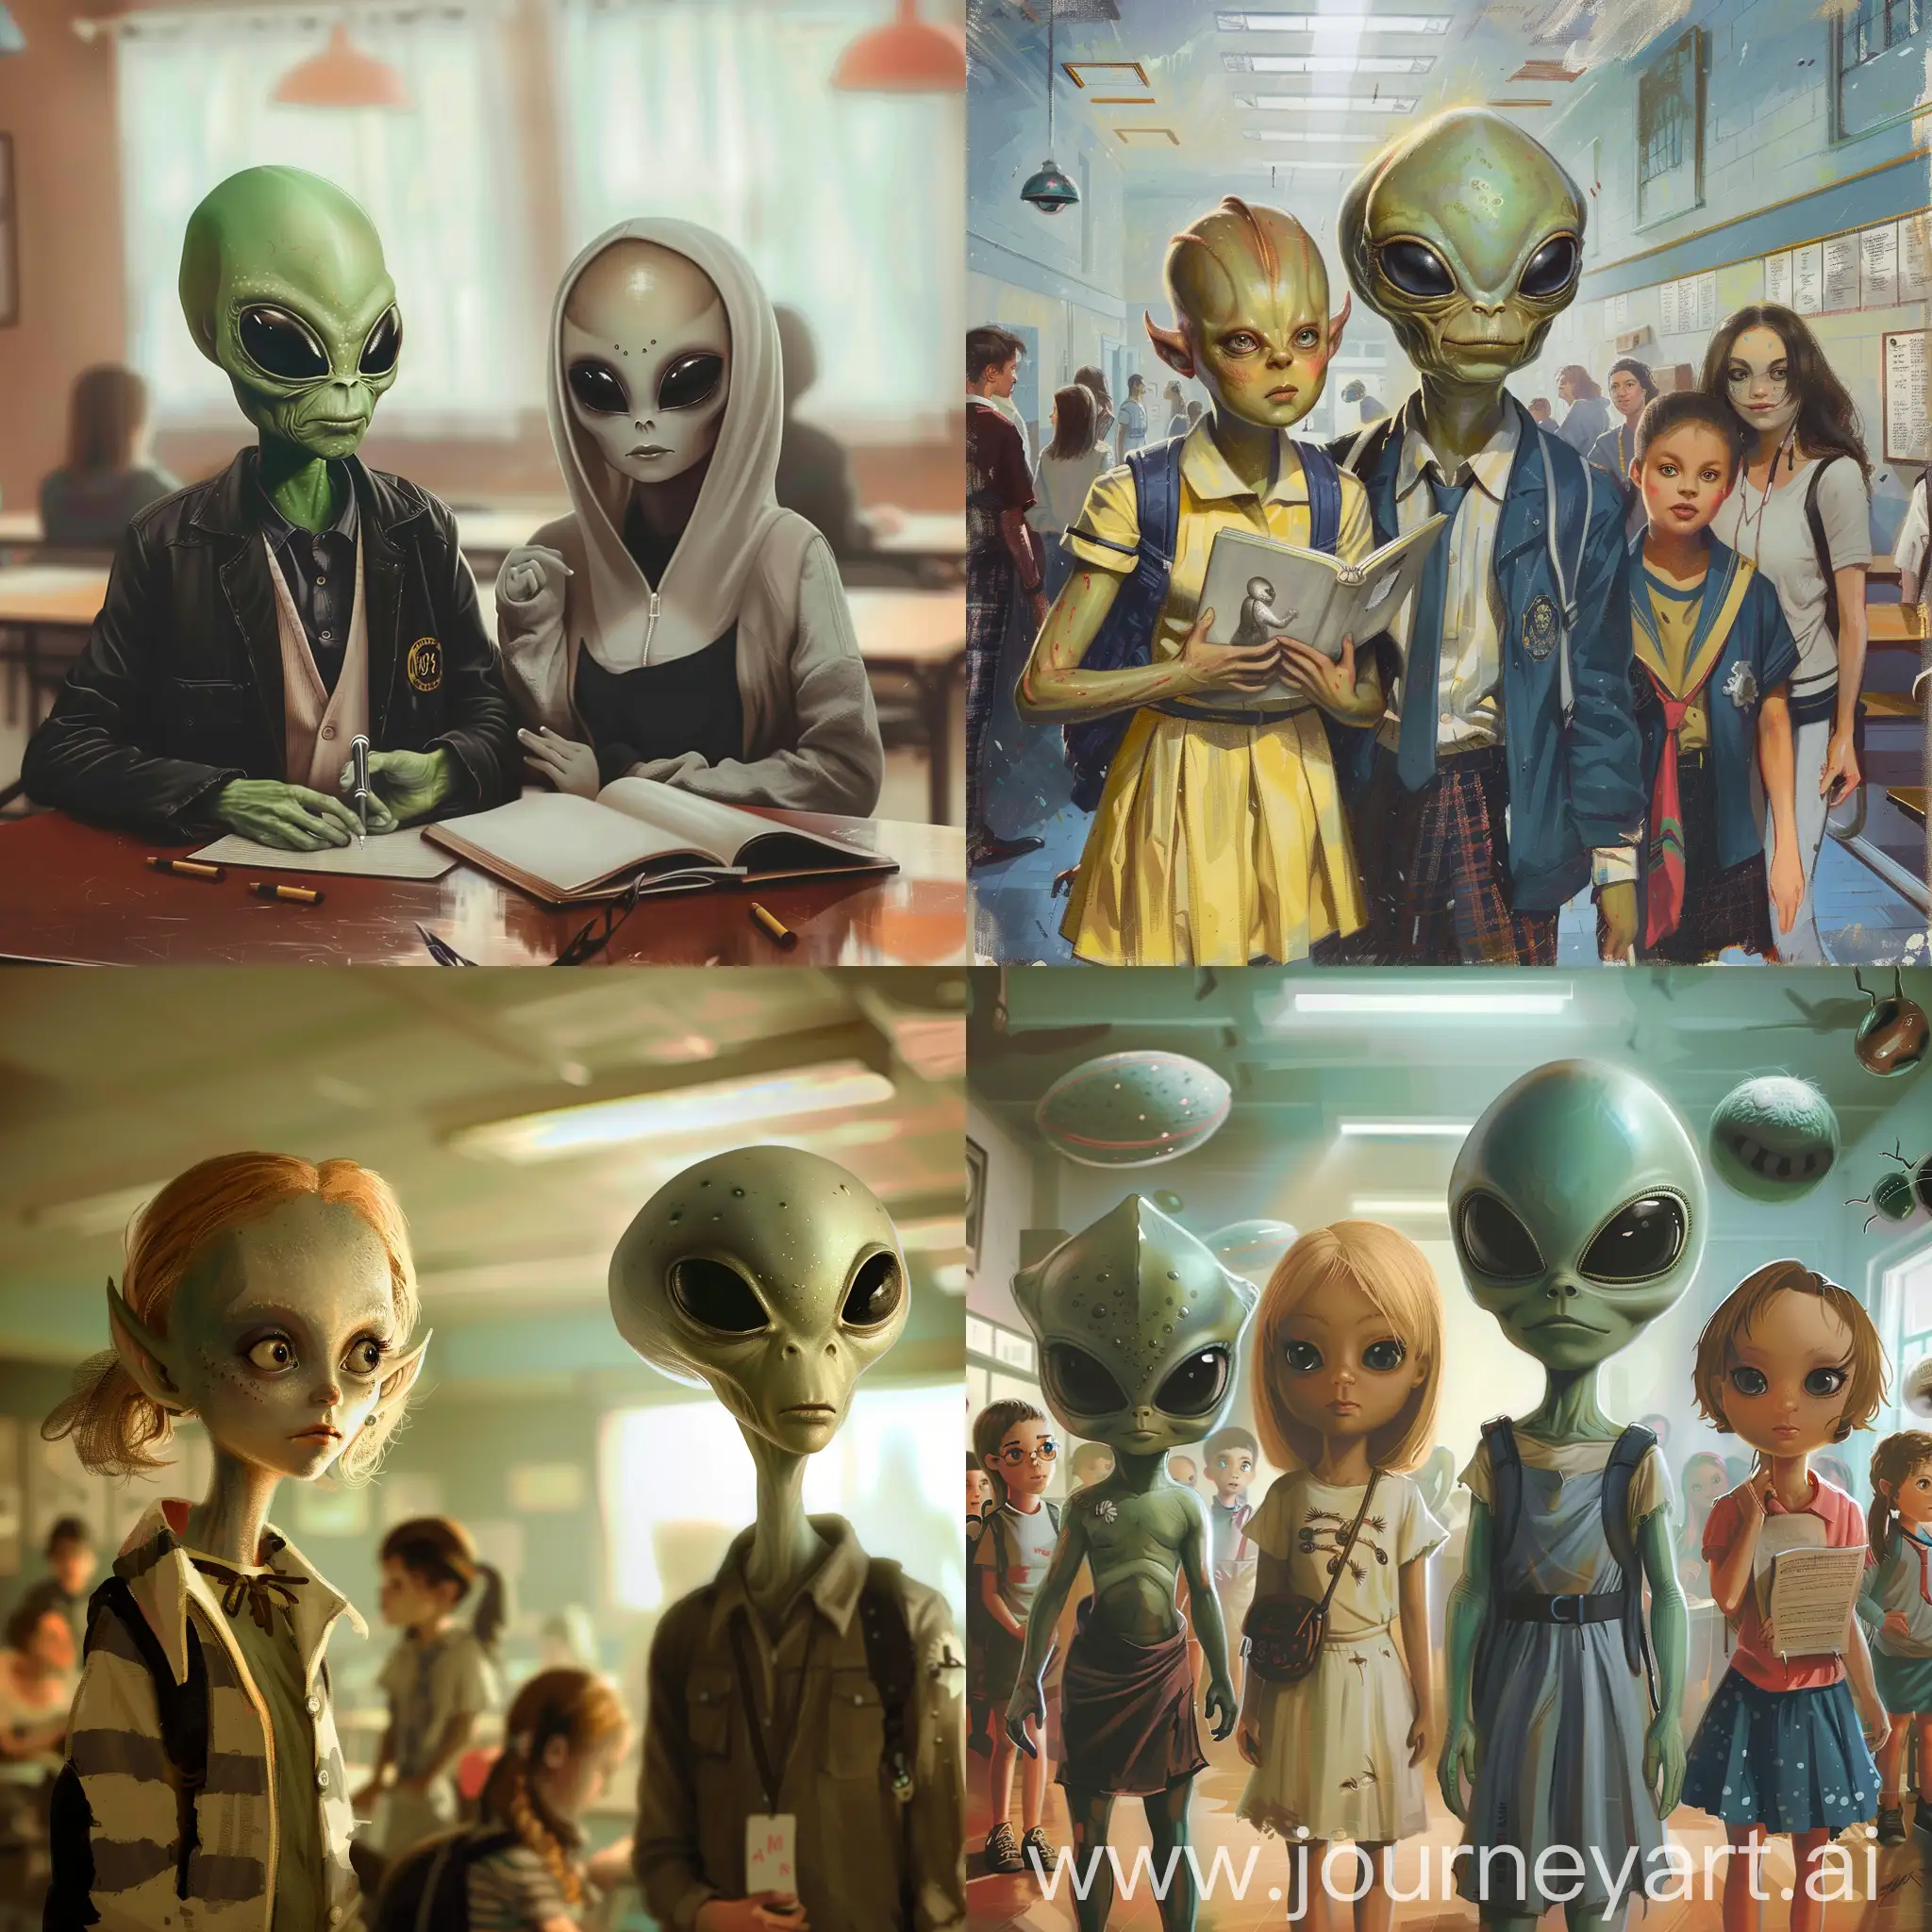 Interstellar-Classroom-Humans-and-Aliens-Learning-Together